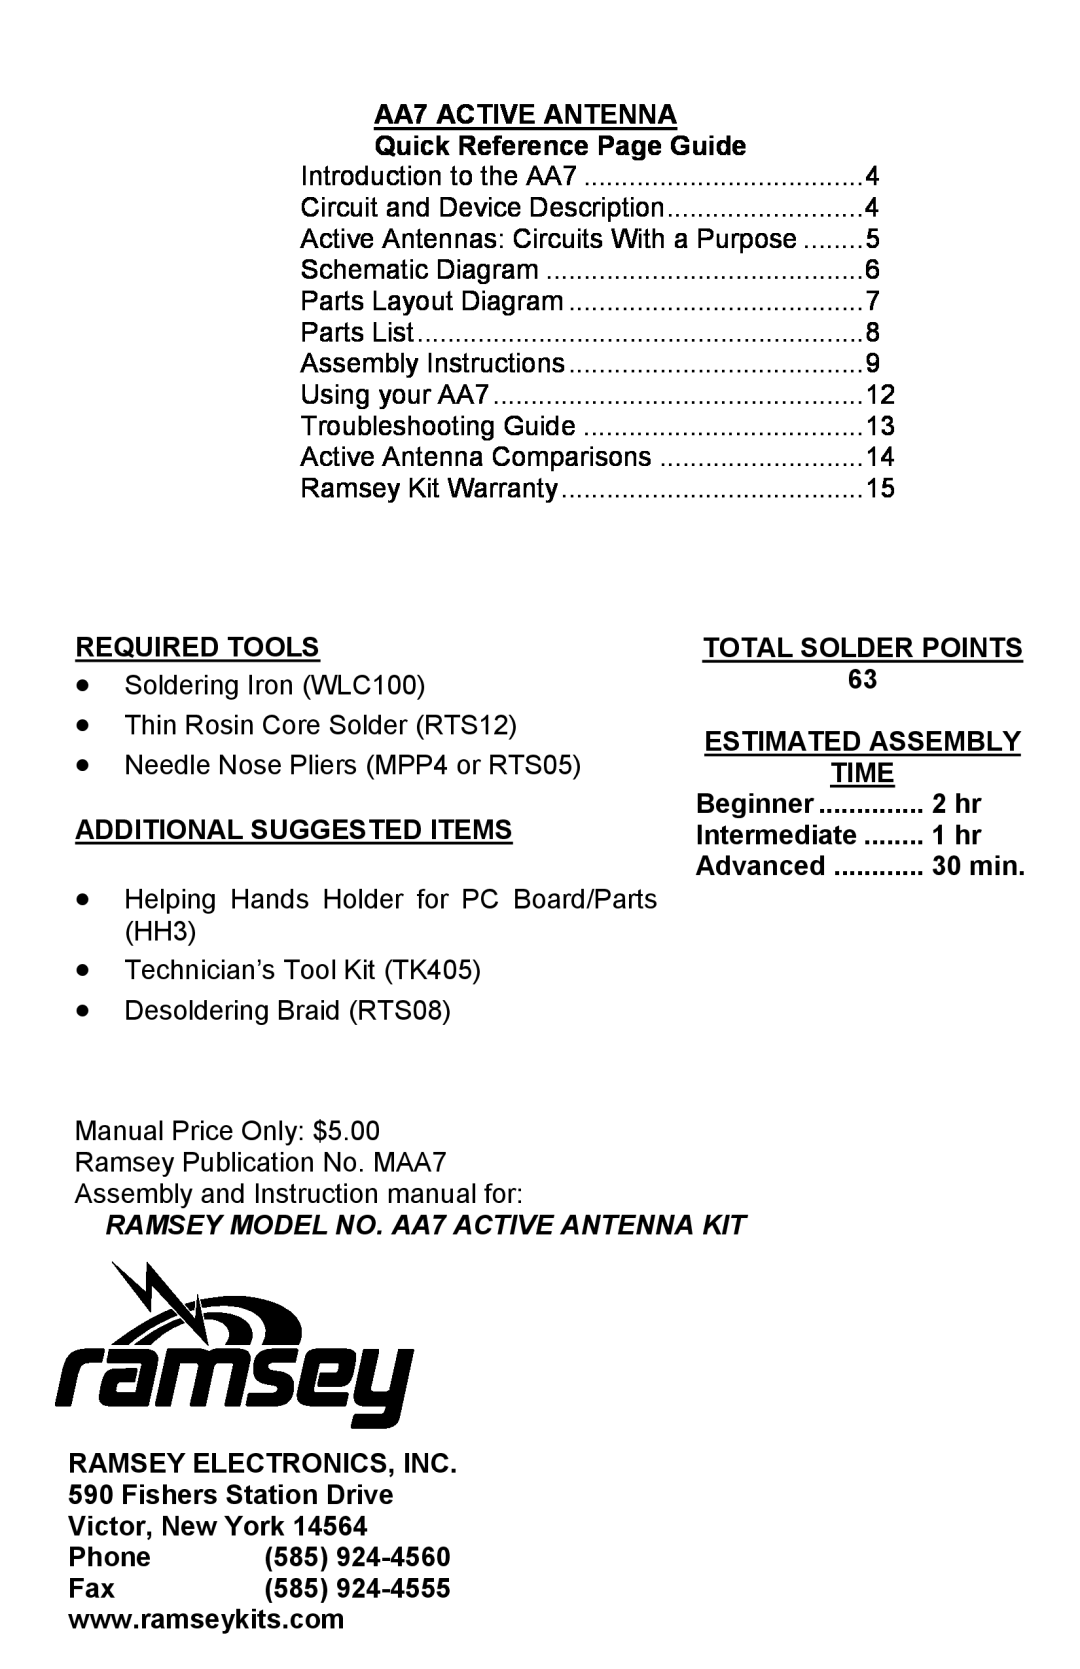 Ramsey Electronics AA7 ACTIVE ANTENNA, Quick Reference Page Guide, TOTAL SOLDER POINTS 63 ESTIMATED ASSEMBLY, Time 